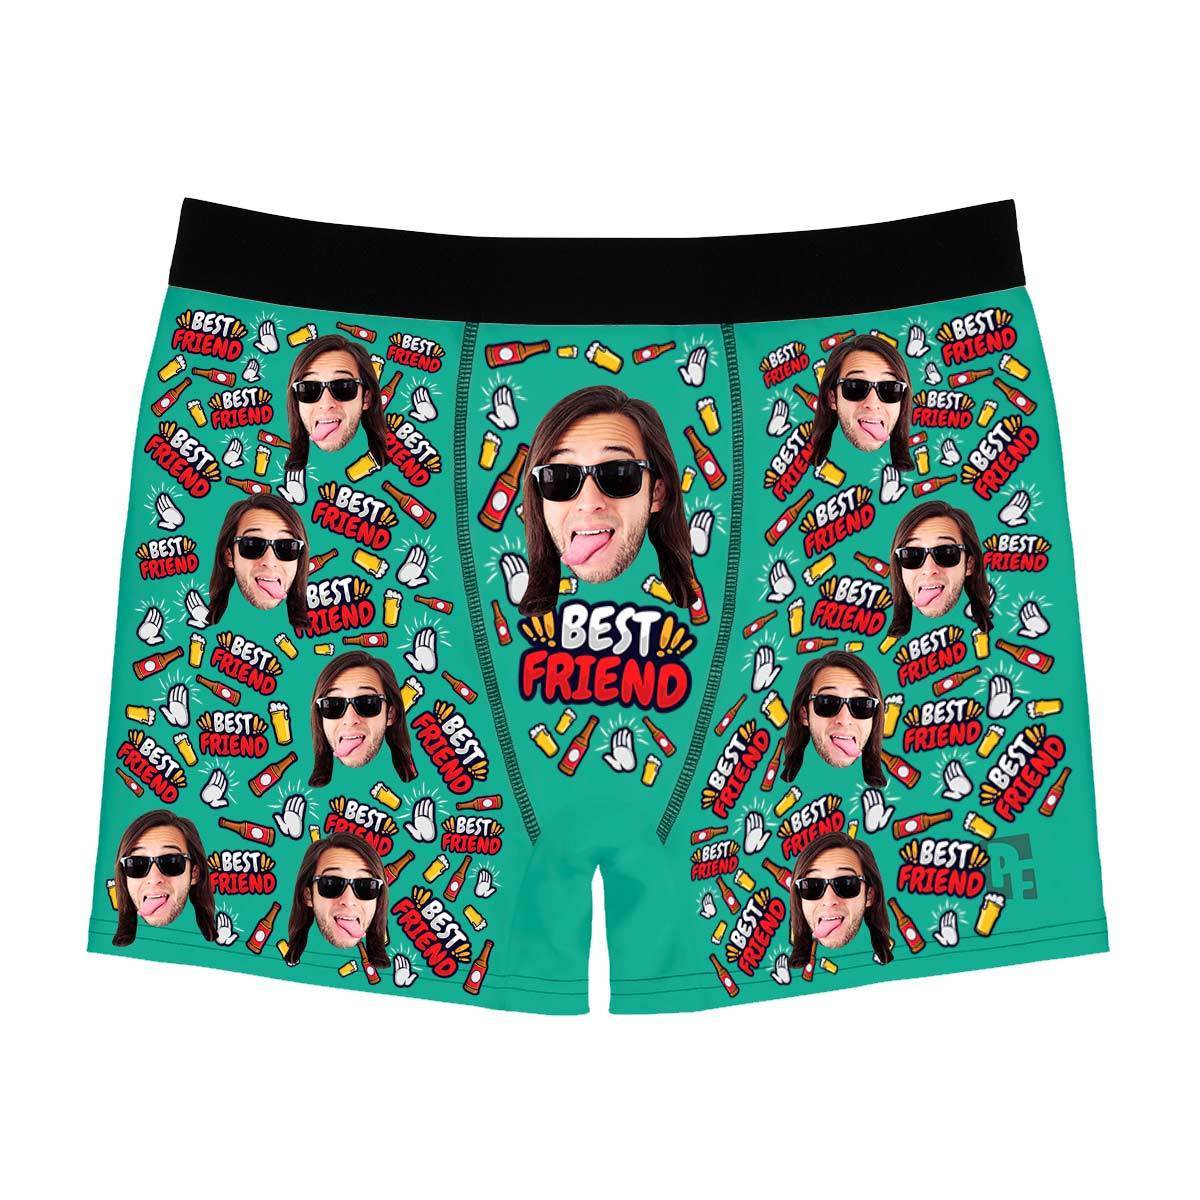 Mint BFF for him men's boxer briefs personalized with photo printed on them